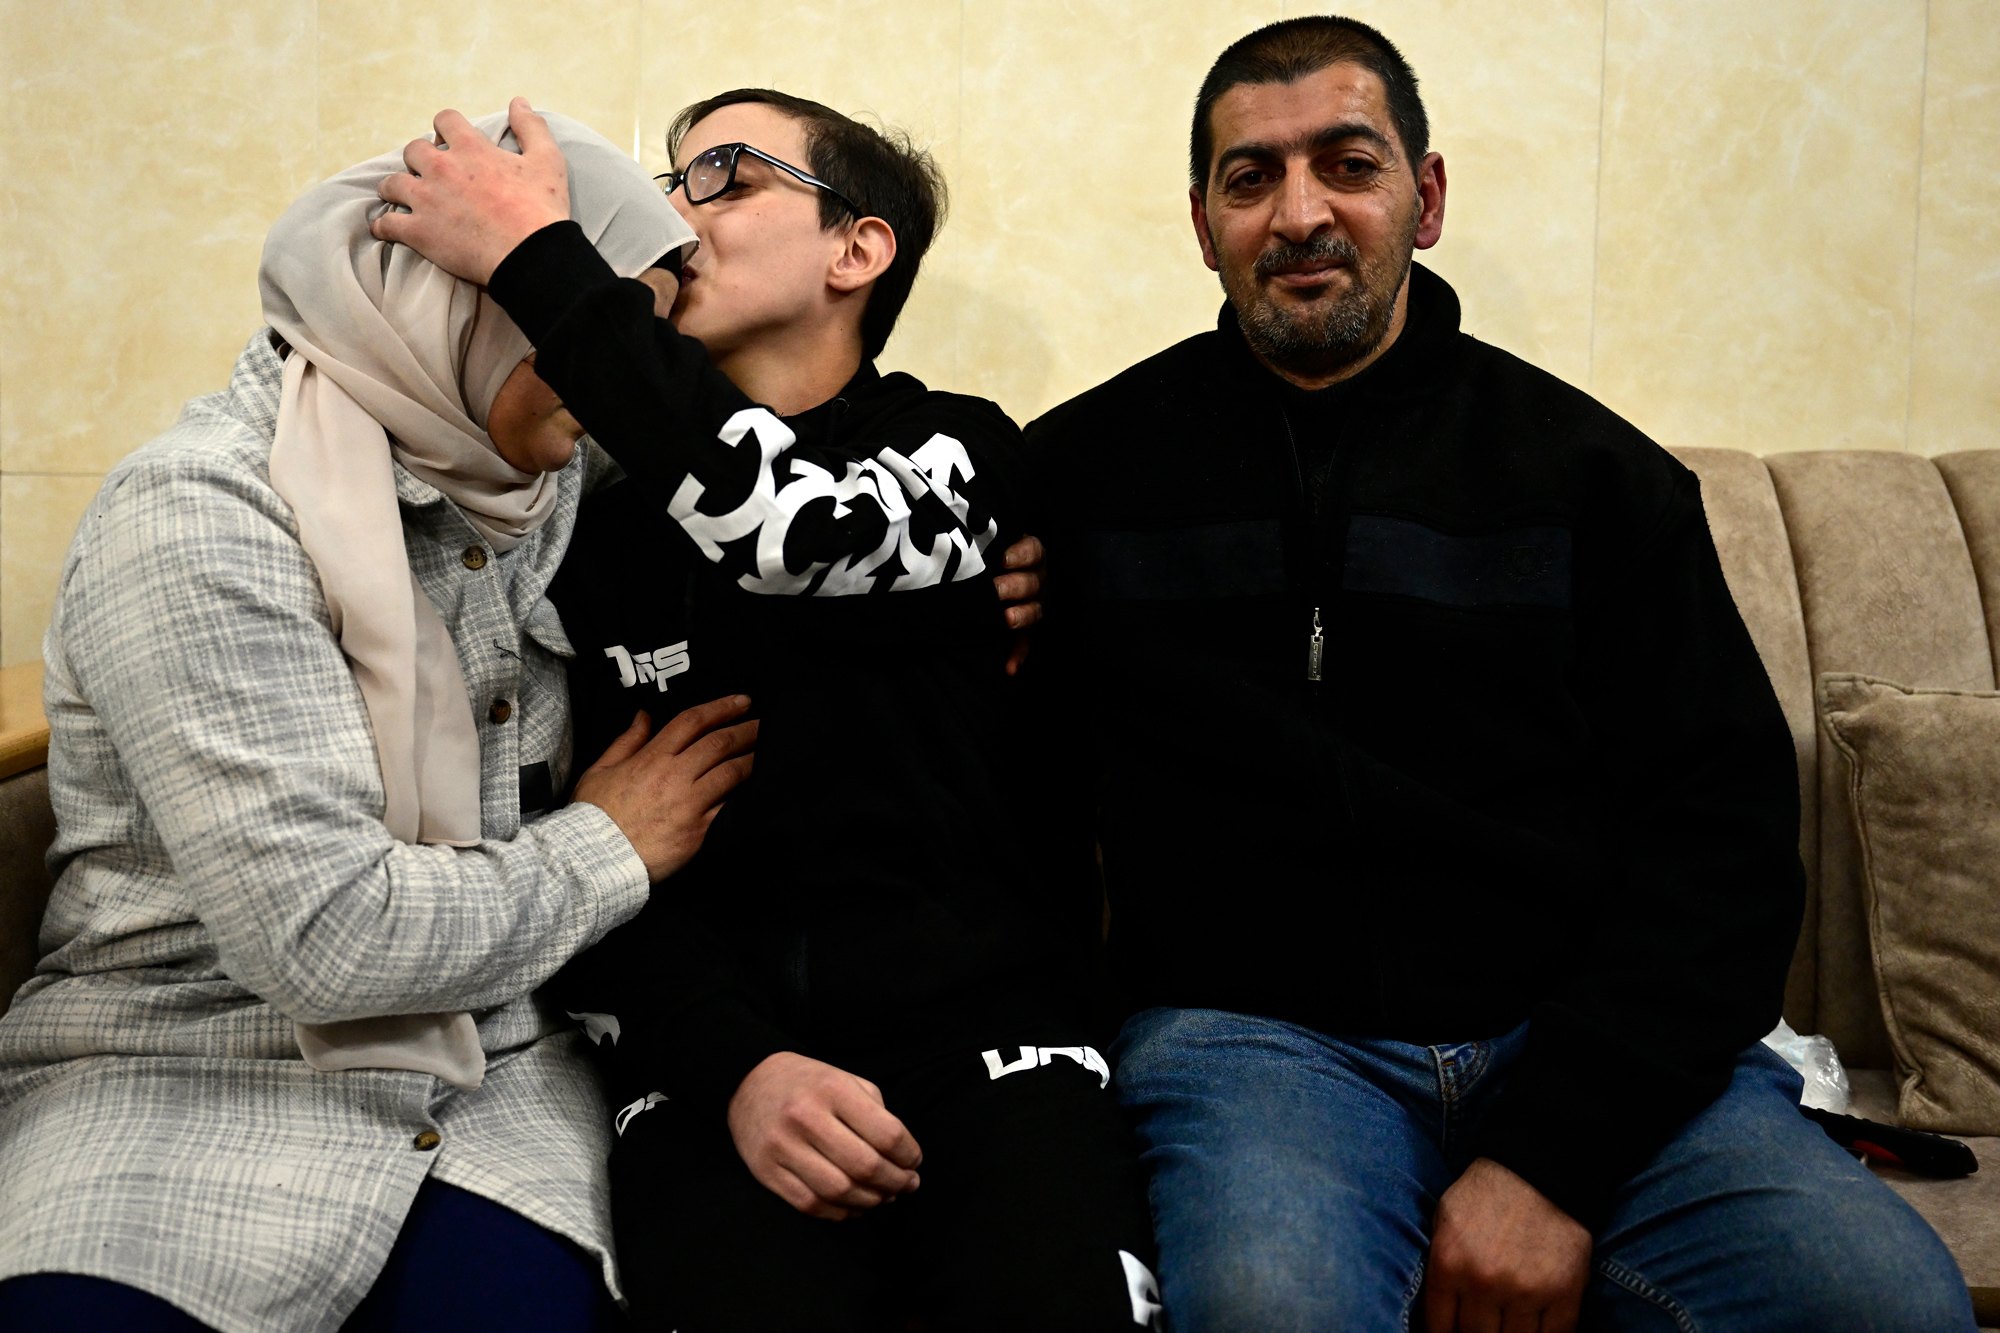 Moataz Salaima, 15, kisses his mother upon his arrival at his home in East Jerusalem on November 28, after 30 Palestinian detainees were released under an extended truce deal.